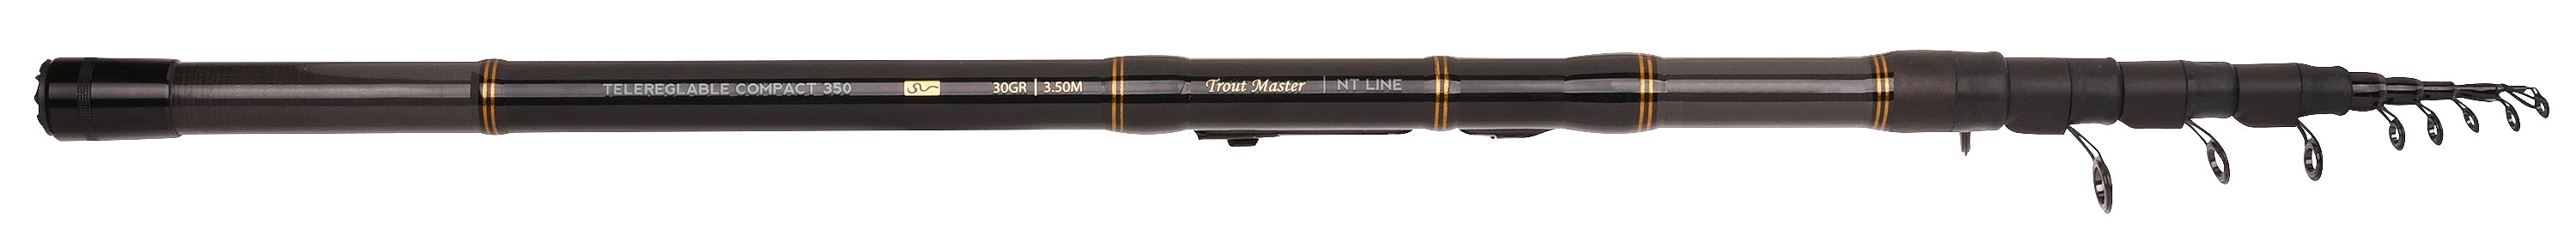 Canne truite Spro Trout Master Telereglable Compact